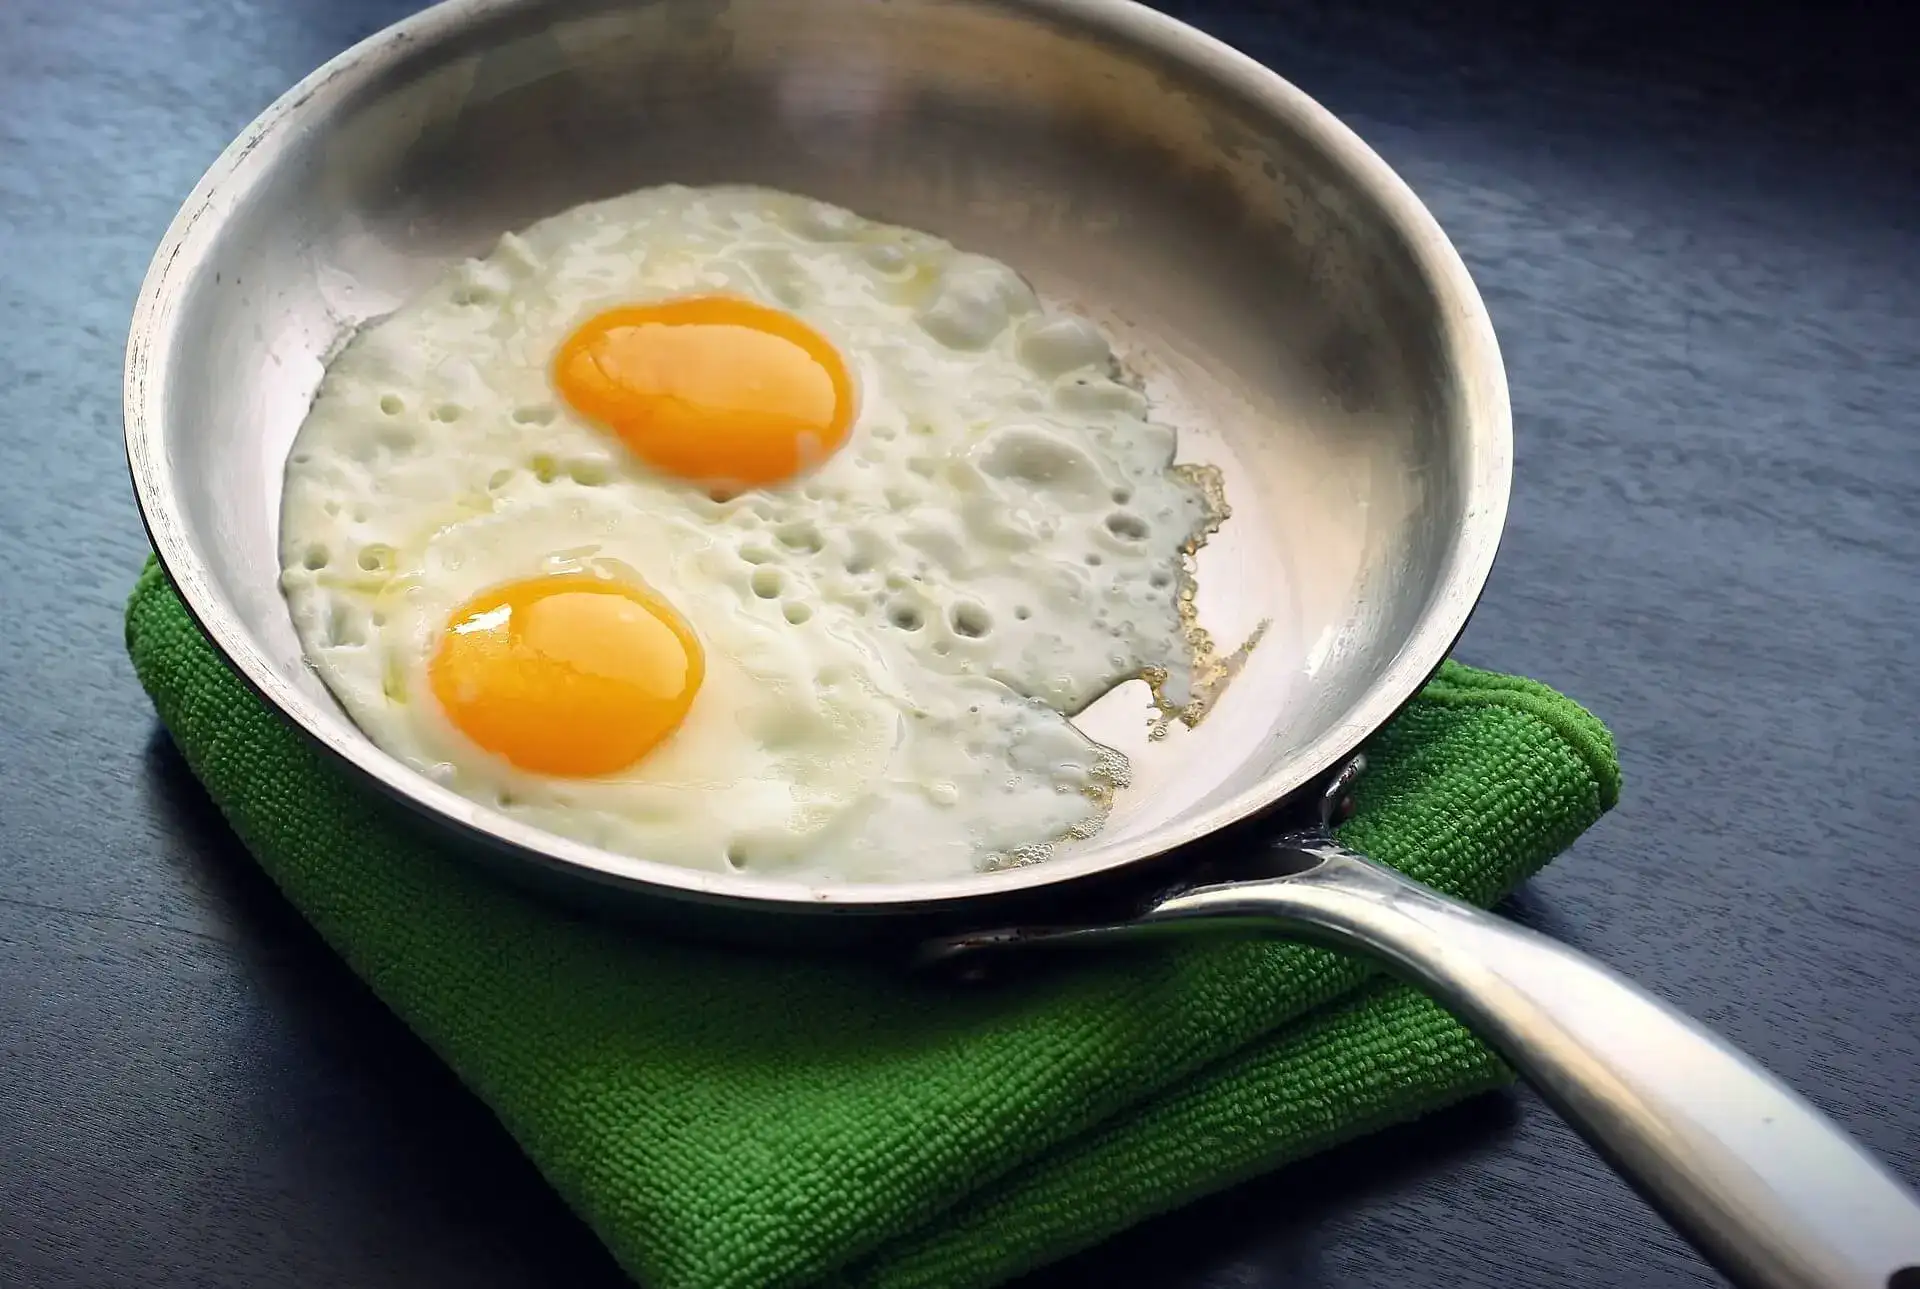 Two eggs in a stainless steel pan